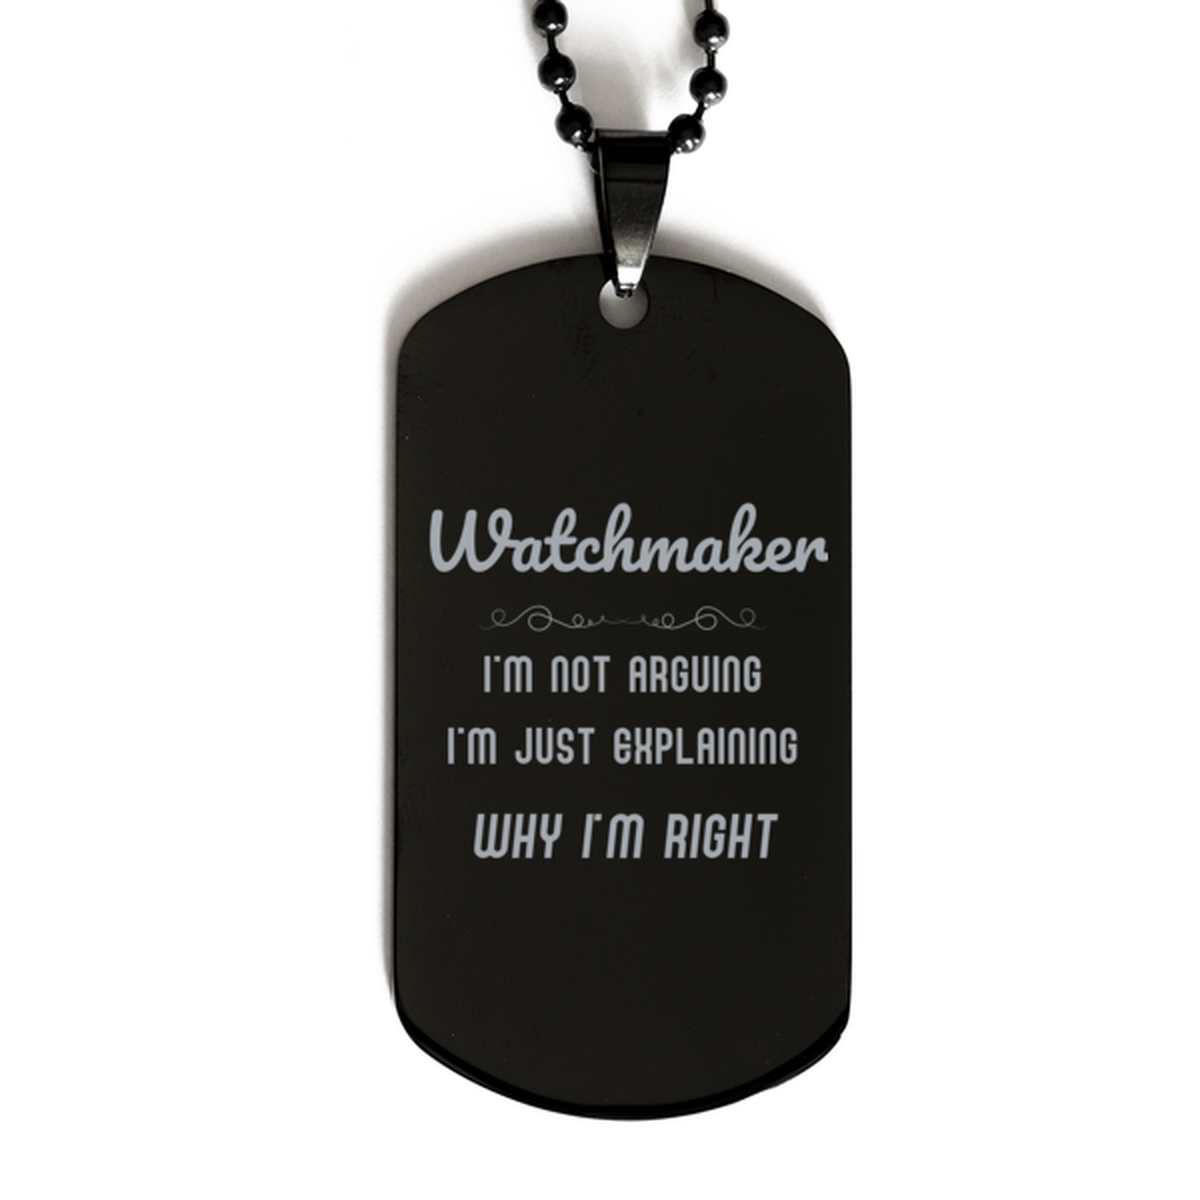 Watchmaker I'm not Arguing. I'm Just Explaining Why I'm RIGHT Black Dog Tag, Funny Saying Quote Watchmaker Gifts For Watchmaker Graduation Birthday Christmas Gifts for Men Women Coworker